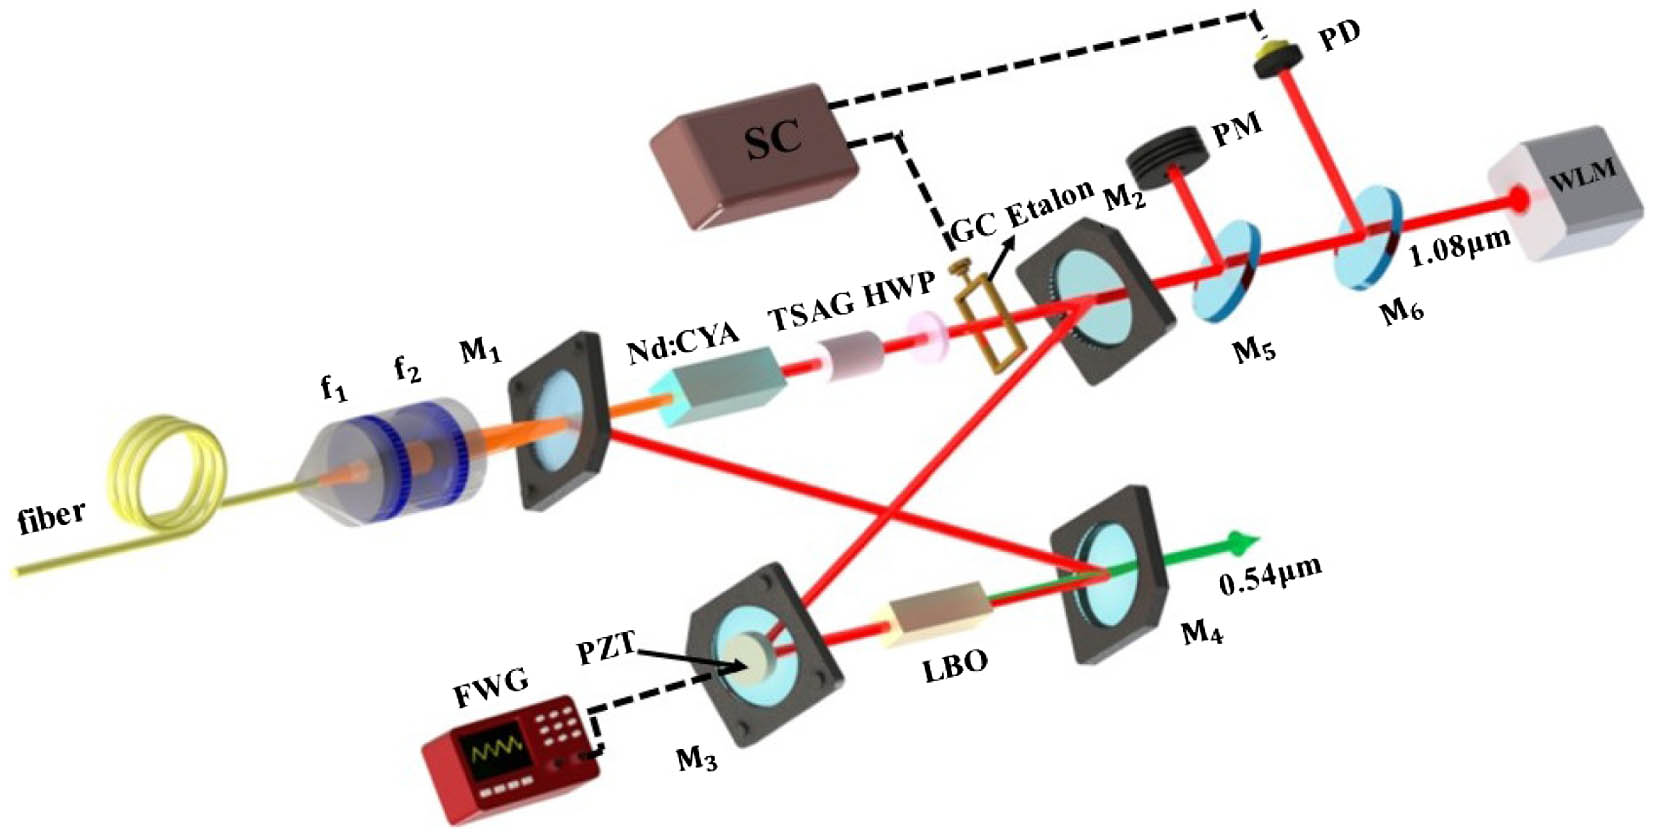 Schematic diagram of the LD-pumped CW SLM tunable dual-wavelength 1.08 µm and 0.54 µm laser. HWP, half-wave-plate; GC, galvanometer scanner; SC, servo controller; PM, power meter; PD, photodetector; WLM, wavelength meter; FWG, function waveform generator; PZT, piezoelectric transducer.